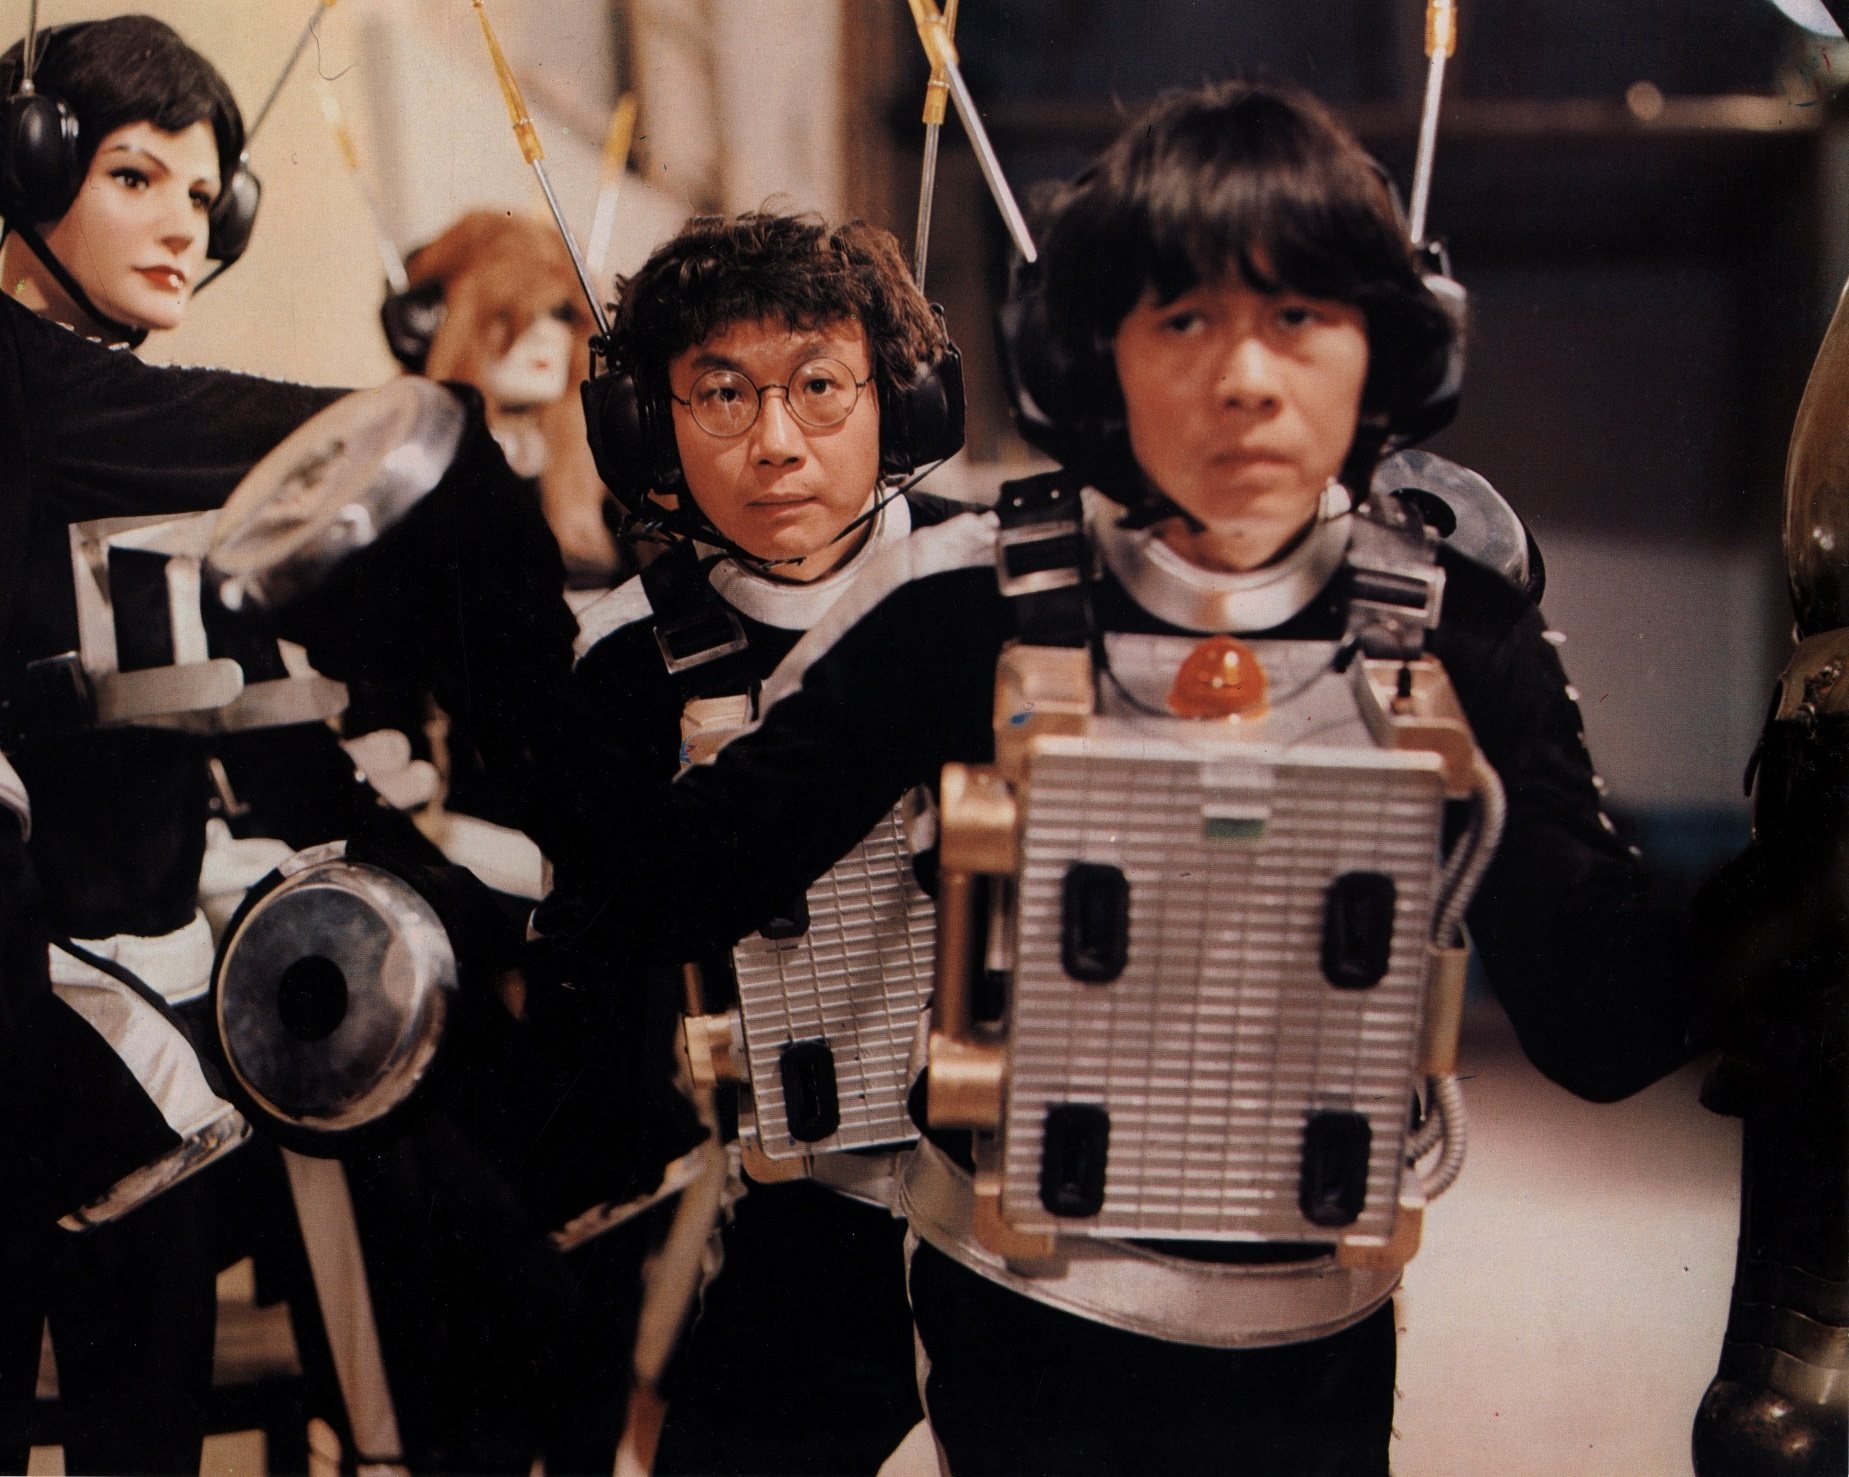 Ricky Hui (front) and Michael Hui in a still from “The Contract” (1978). Hui was the box-office champion in the 1970s, but what else happened in Hong Kong cinema during that decade? 